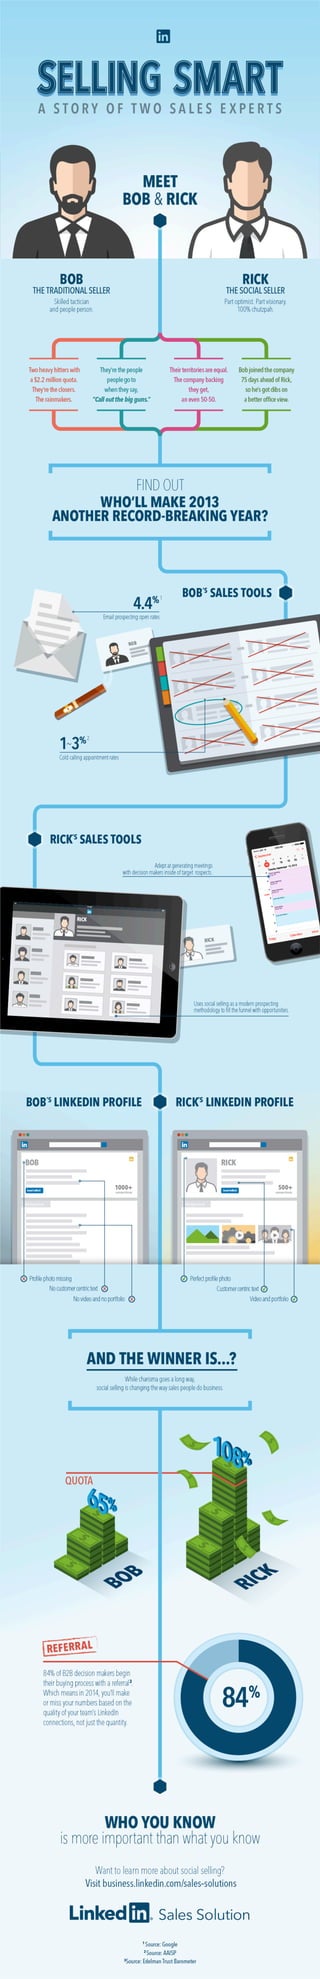 Story of two sales experts linkedin infographic